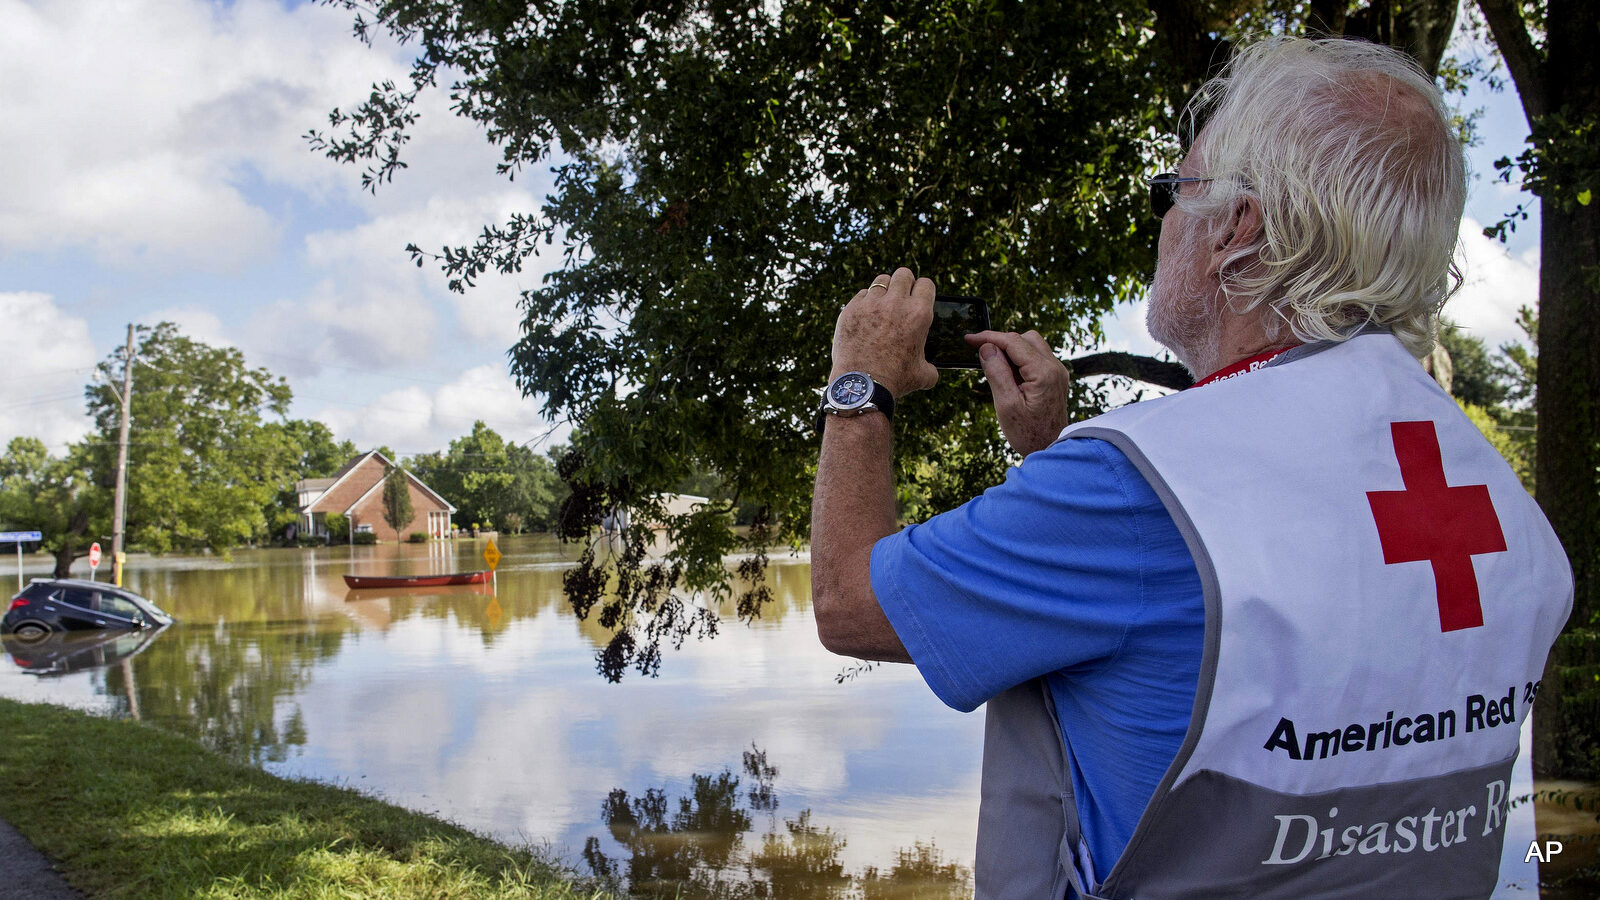 James Hennessy, a Red Cross mental health volunteer from Tallahassee, Florida, takes a photo of Old Jefferson Highway which he was hoping to cross to reach Baton Rouge in Prairieville, La., Tuesday, Aug. 16, 2016.